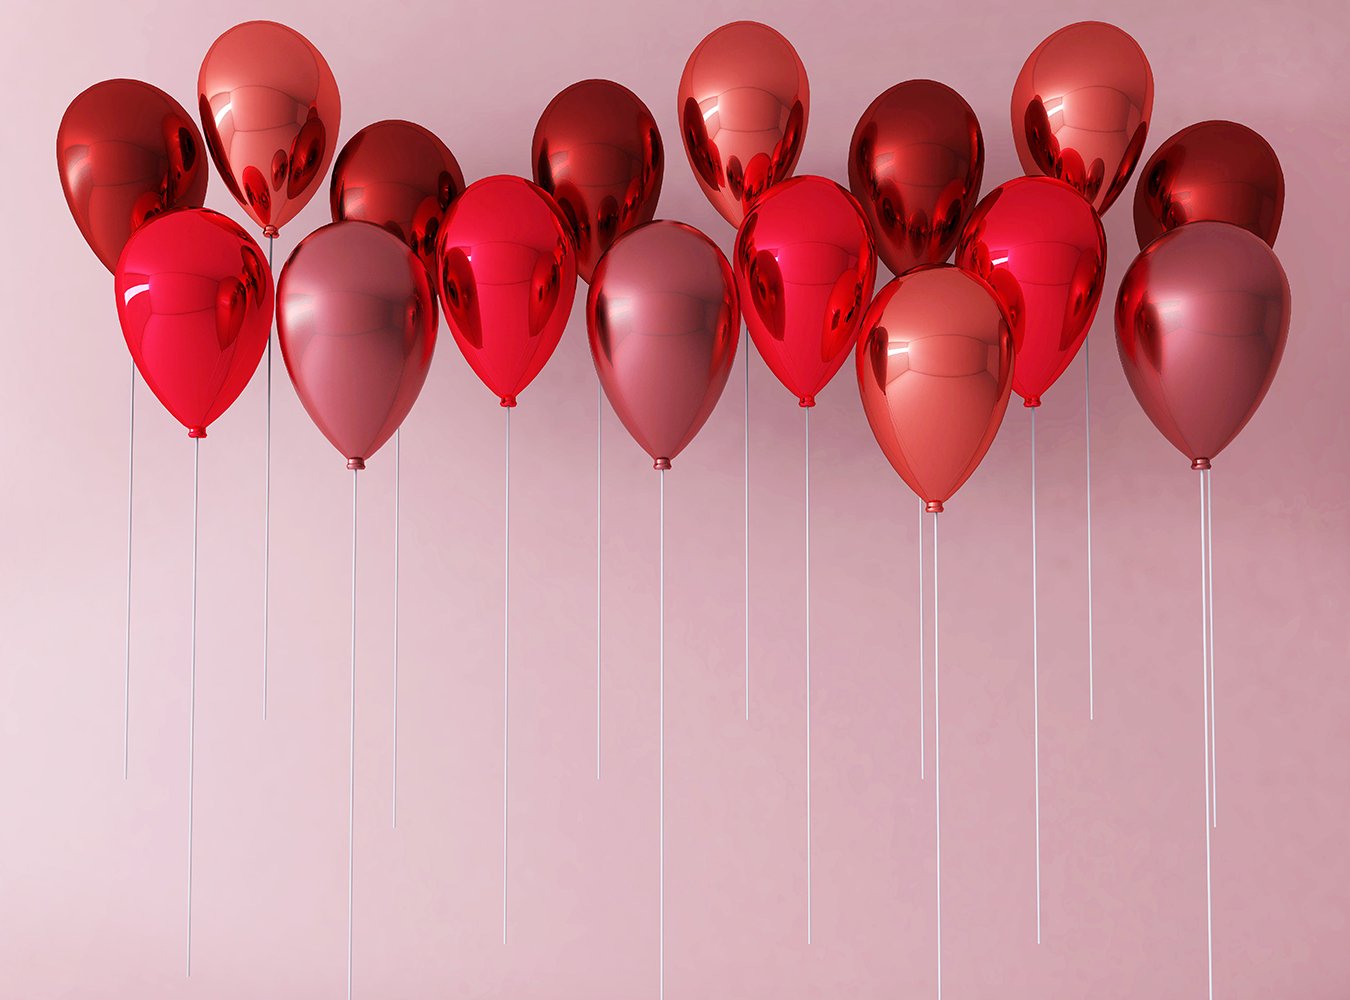 Lovely Bright Red Balloon with Light Red Background Photo Backdrop for –  iBACKDROP